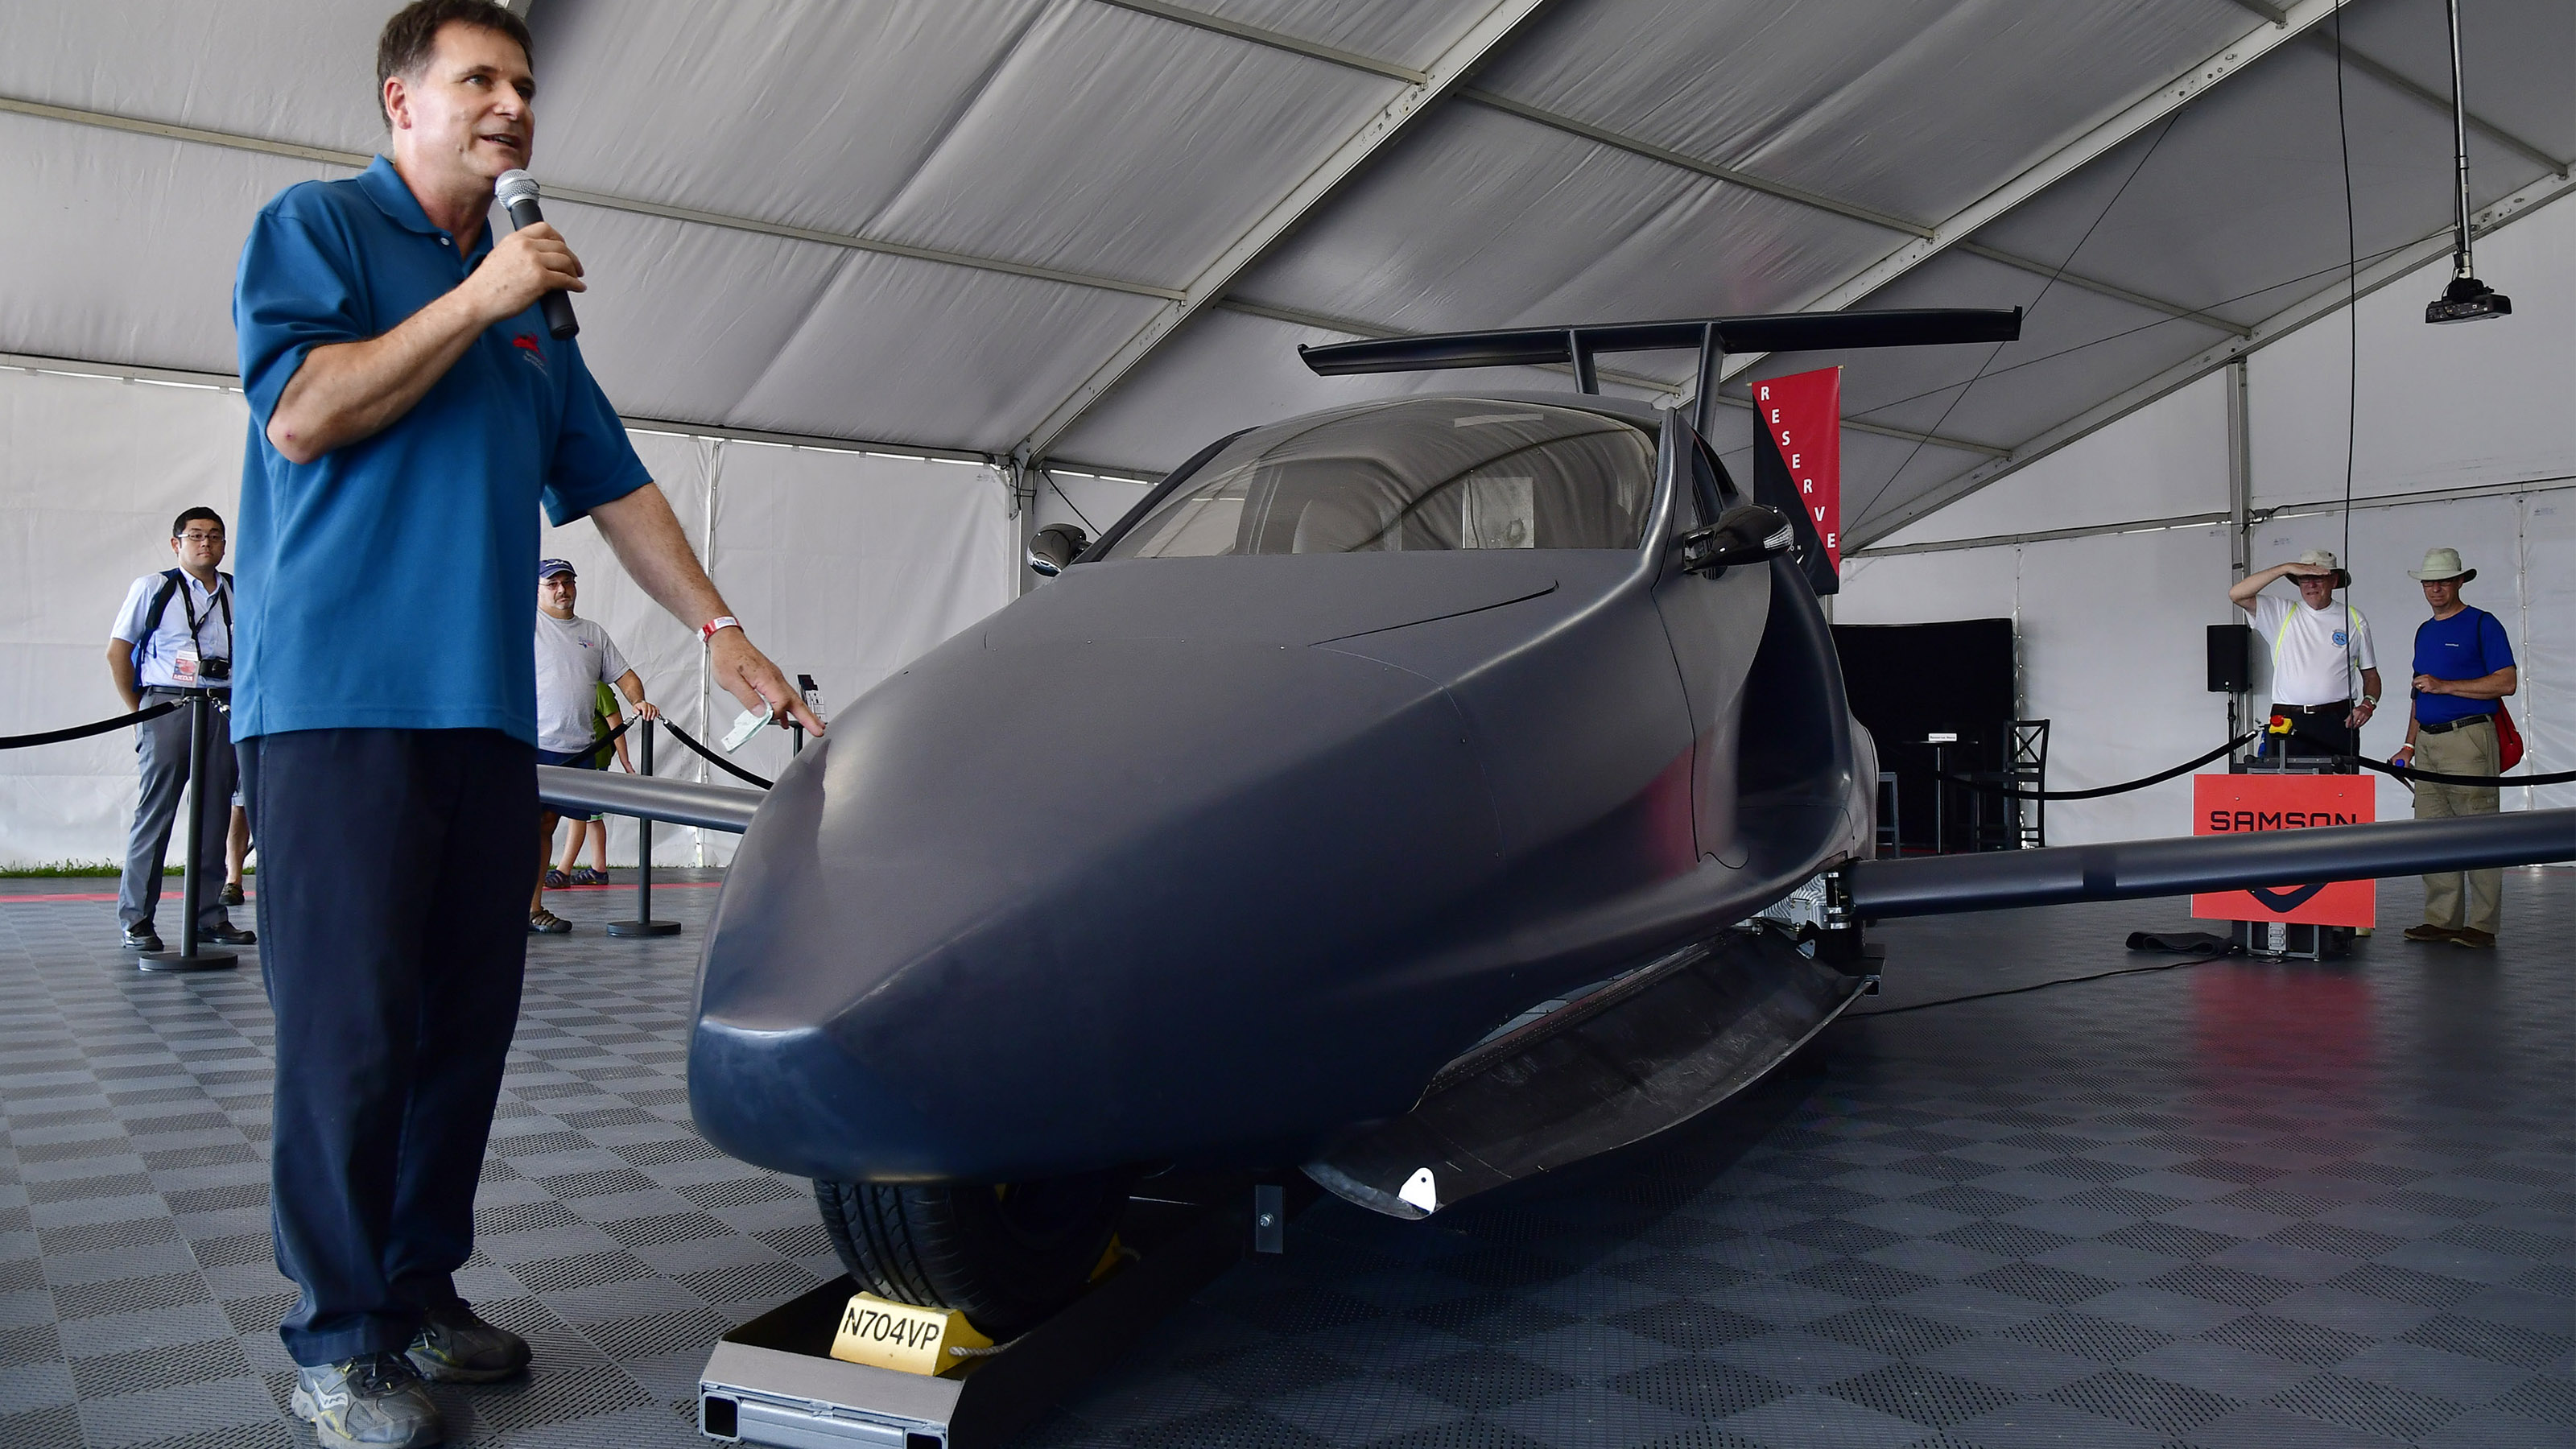 Samson Switchblade's Sam Bousfield describes the flying sports car during EAA AirVenture in Oshkosh, Wisconsin, July 24, 2018. Photo by David Tulis.